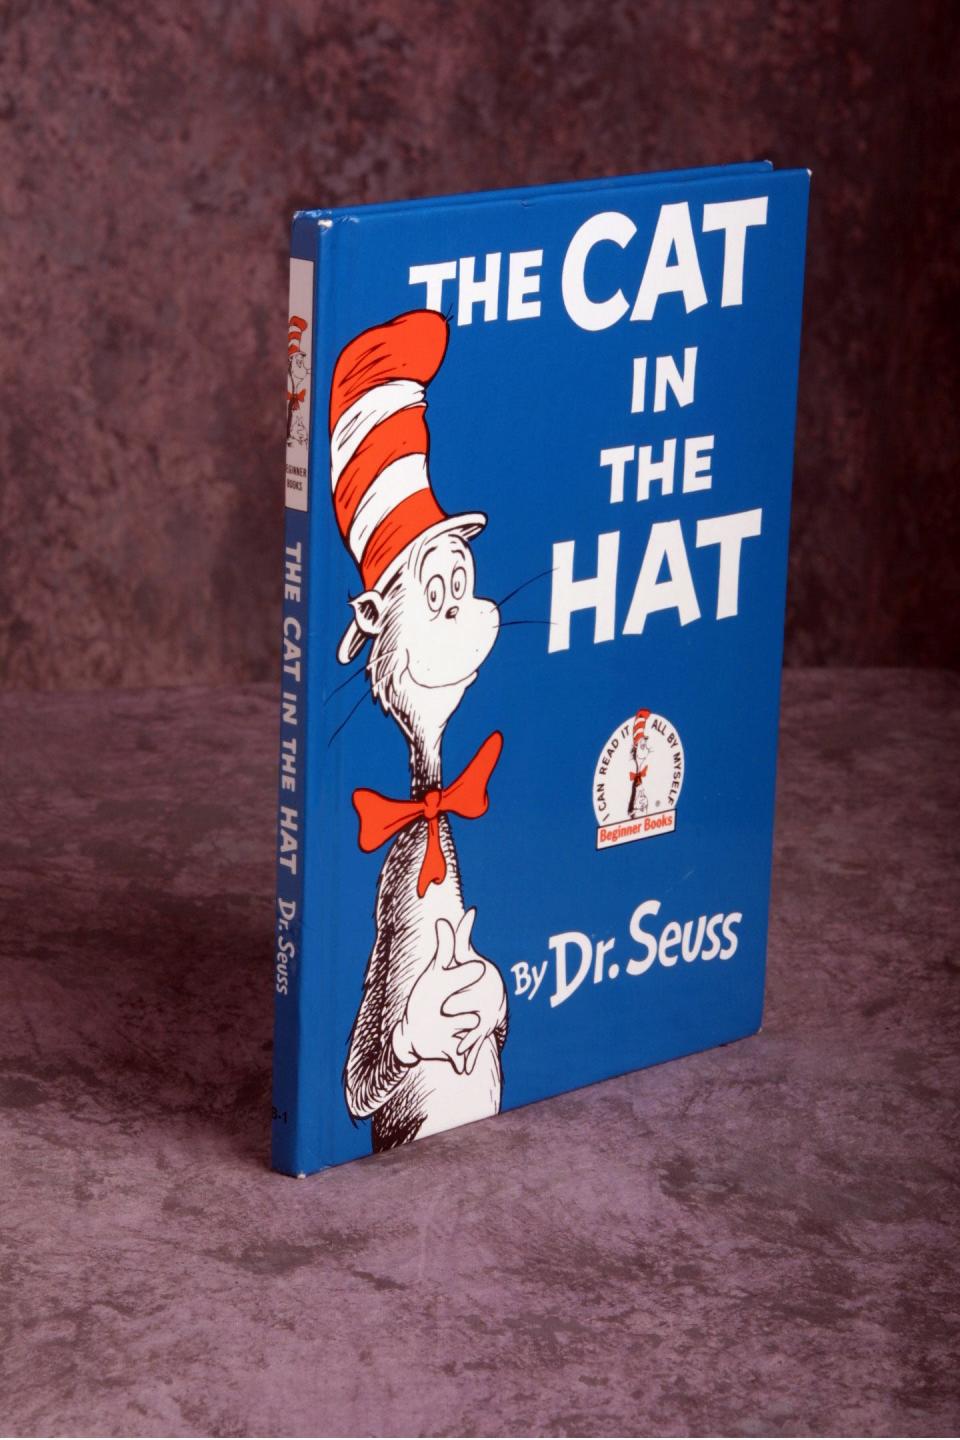 "The Cat in the Hat" by Dr. Seuss.